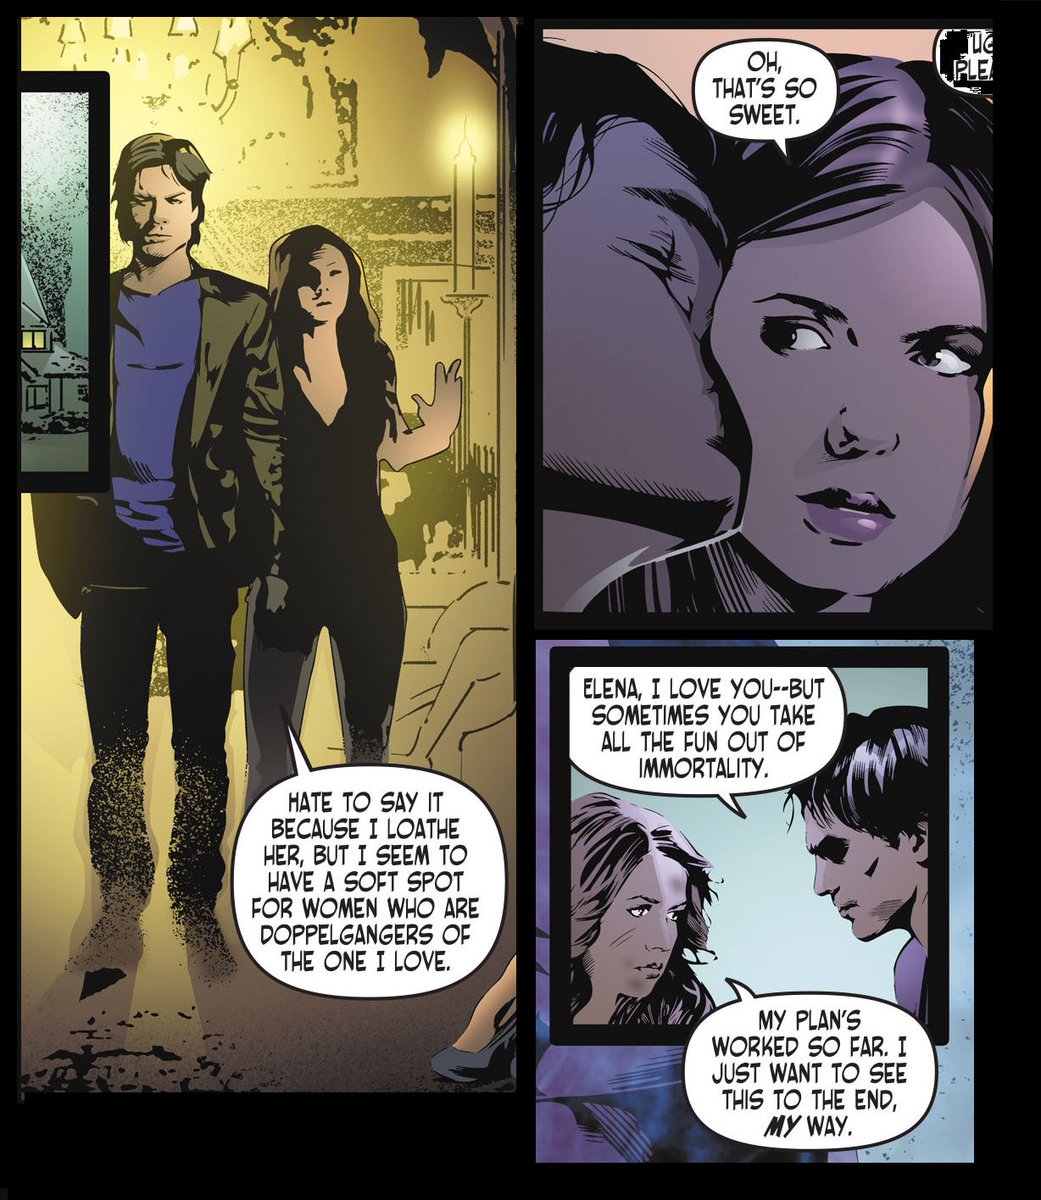 Damon and Elena are endgame in The vampire diaries comics.You can find all Delena scenes from the comics here:  https://mega.nz/folder/yGgS1QrL#4oJ7RkMKjoqgukiPqGpnLw